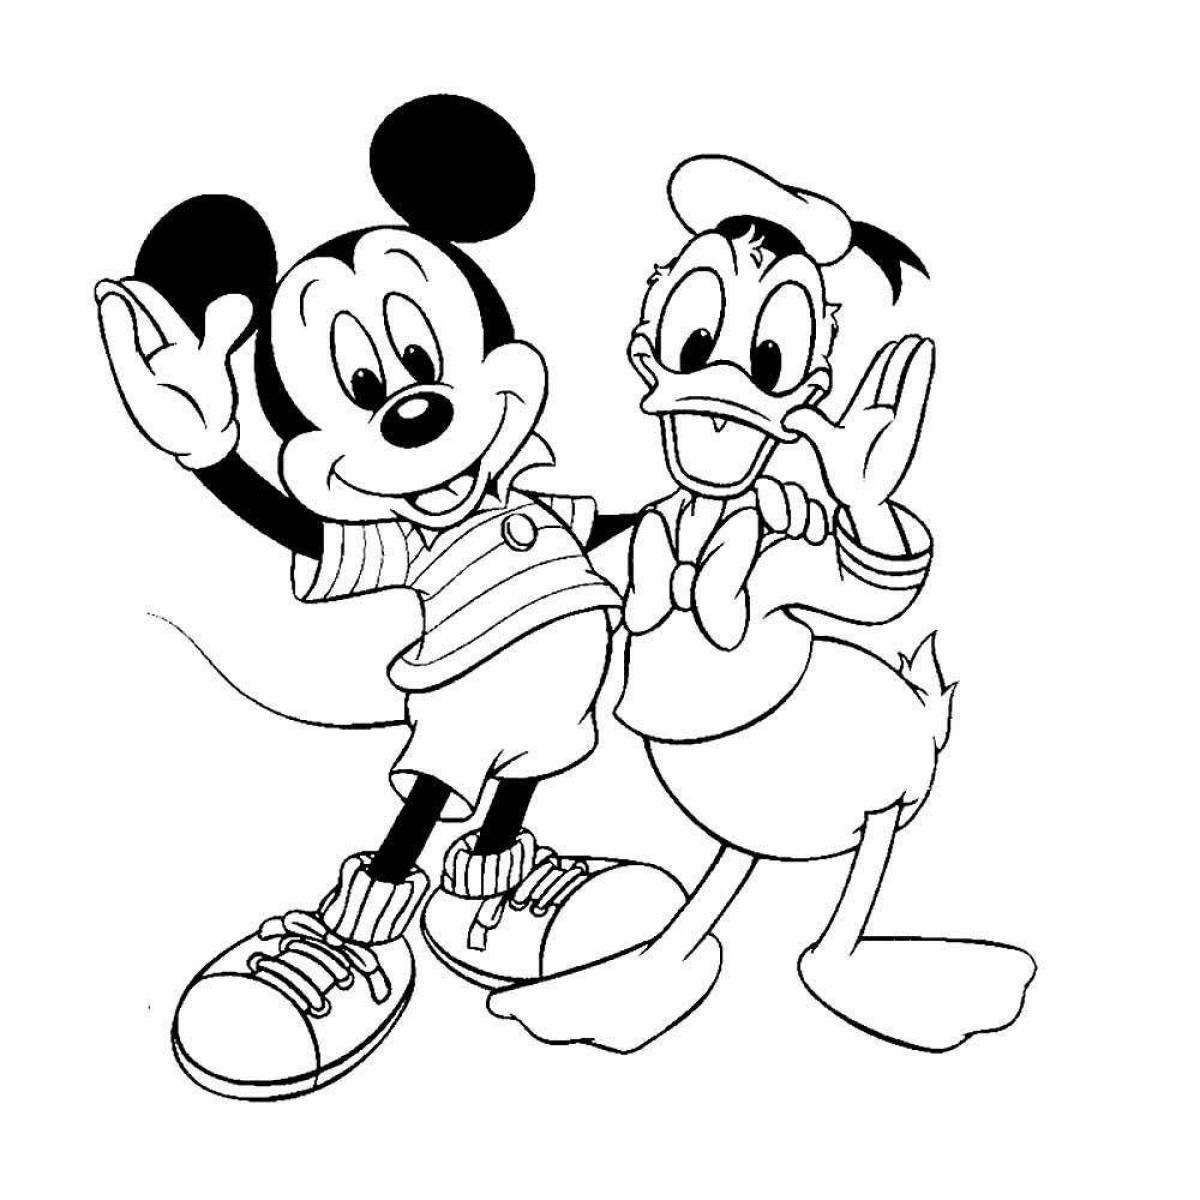 Adorable mickey games coloring page